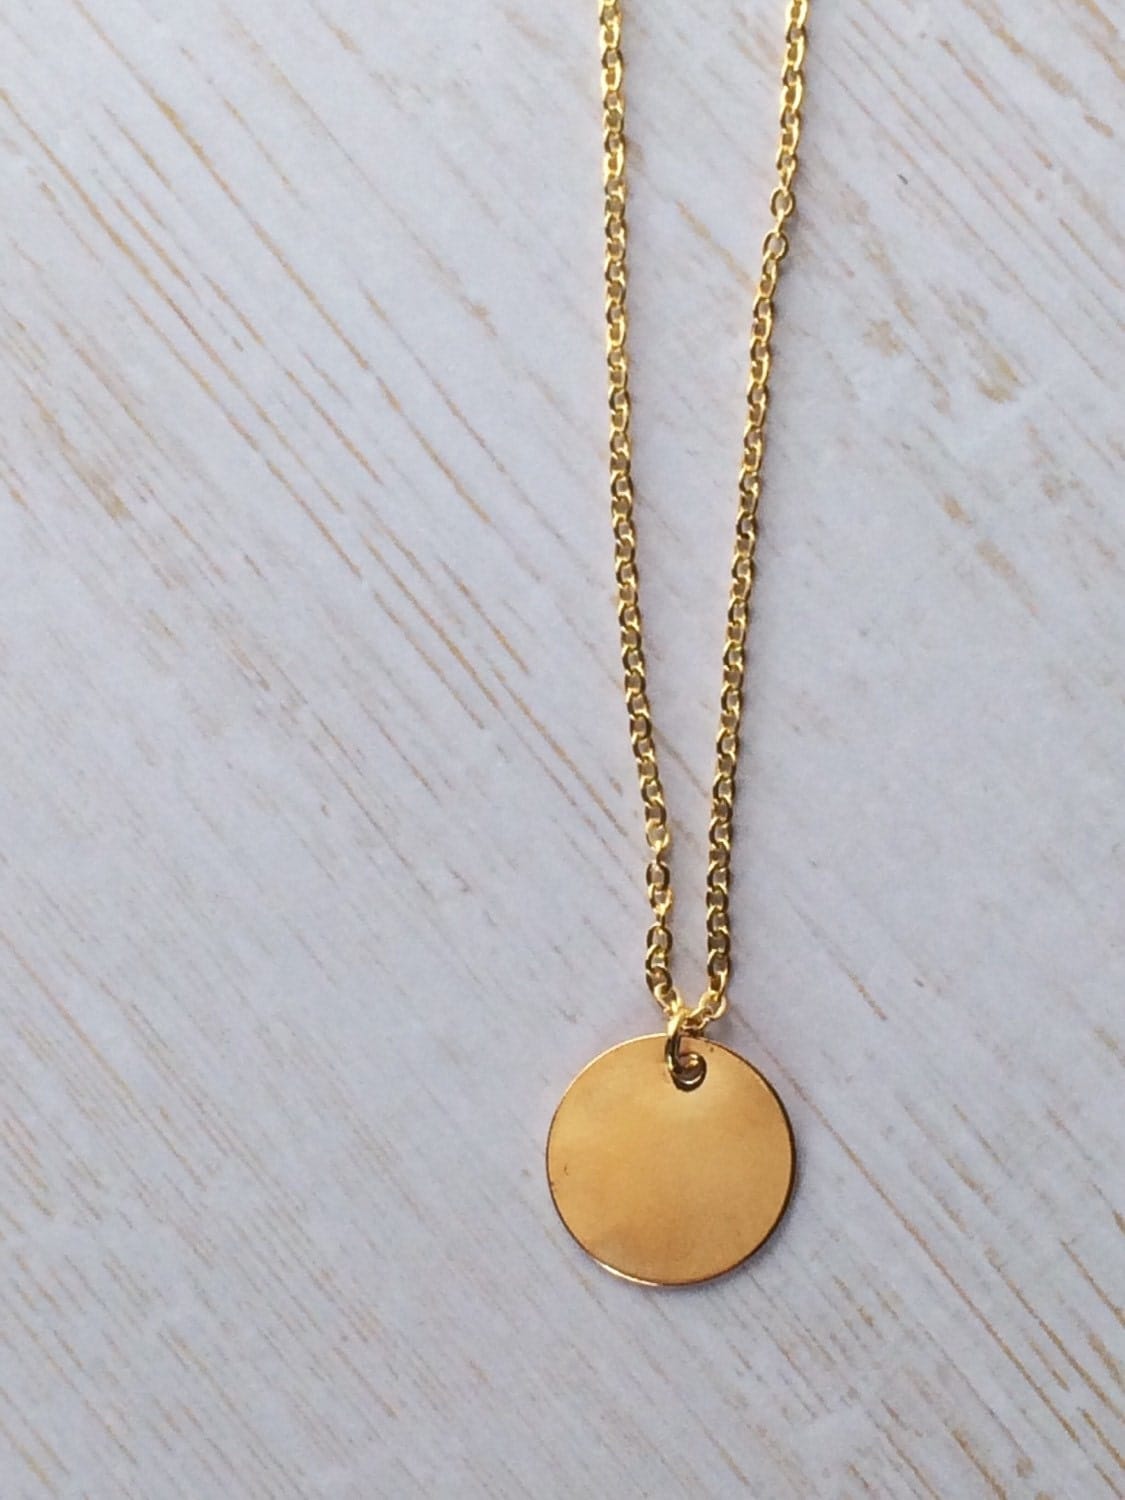 Gold circle pendant small on delicate gold chain